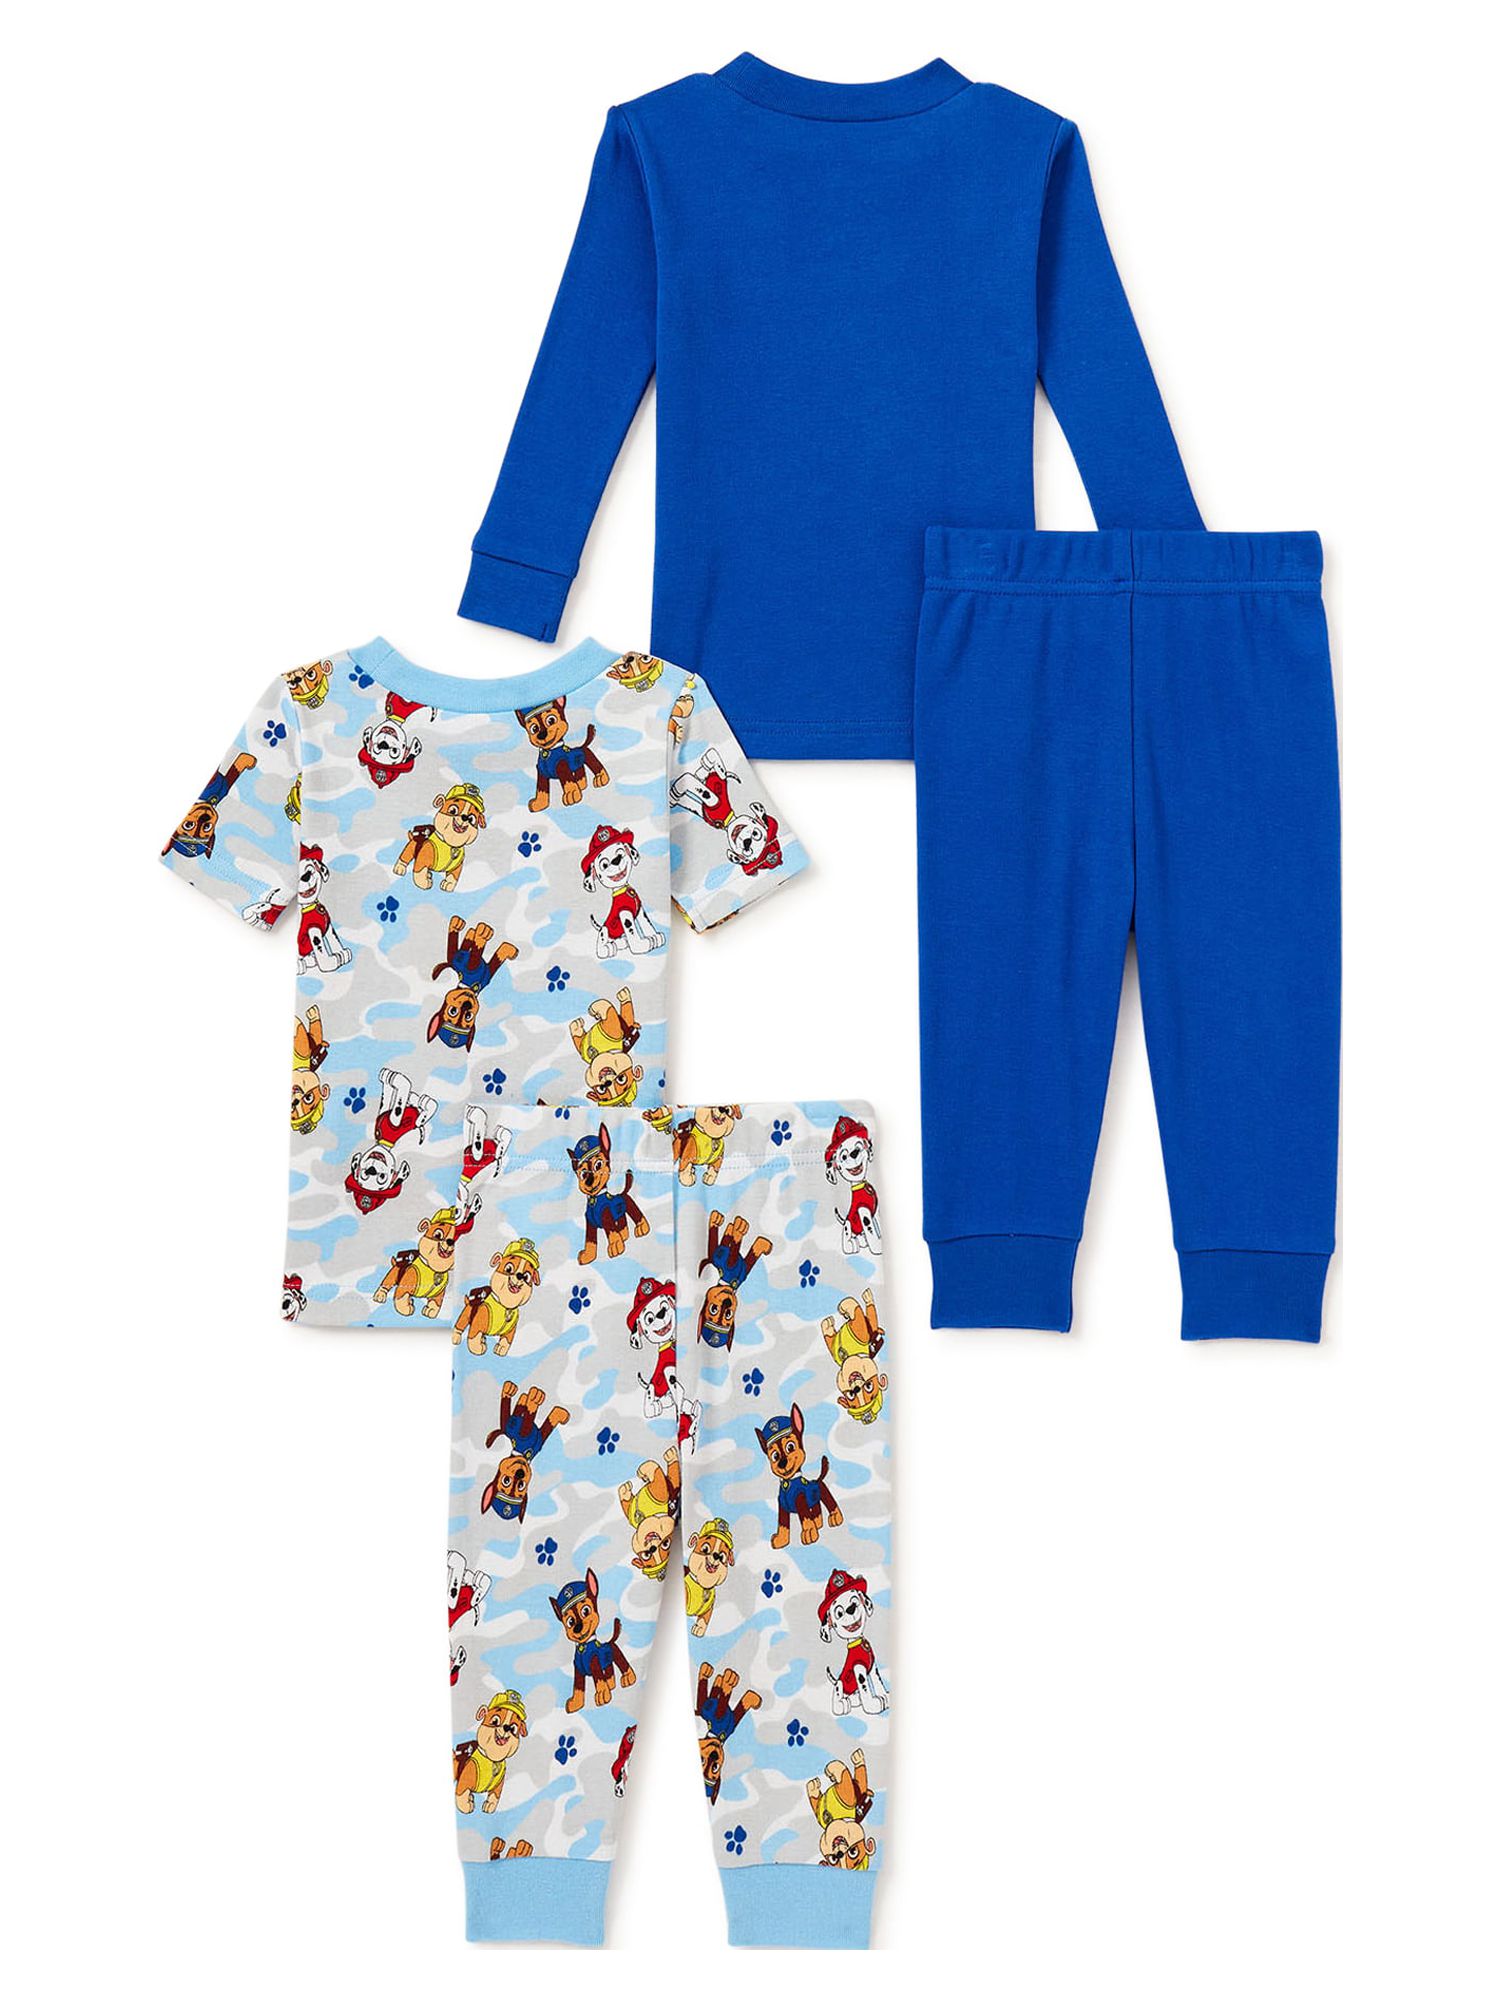 Toddler Character Pajama Set, 4-Piece, Sizes 12M-5T - image 2 of 3